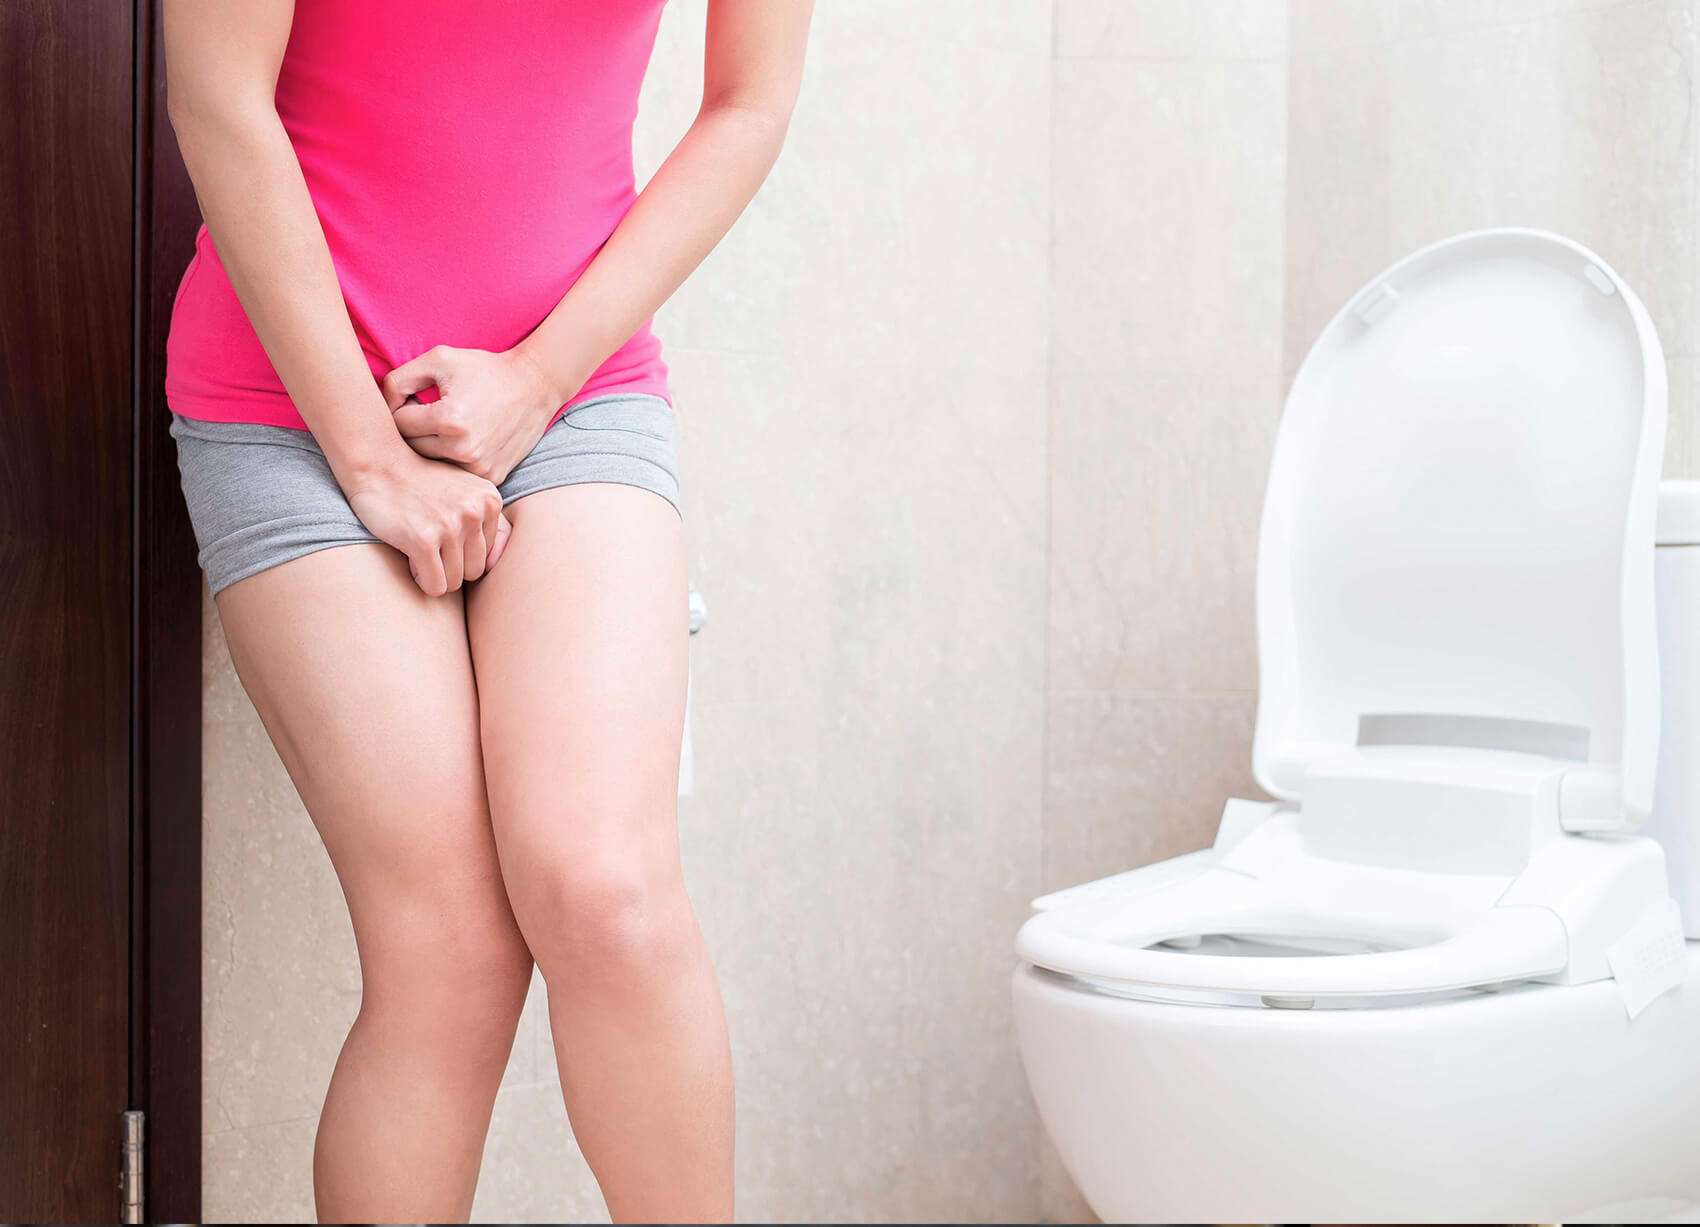 200% of people will not know the benefit of stopping urination for a long time, you will also know this is a surprise